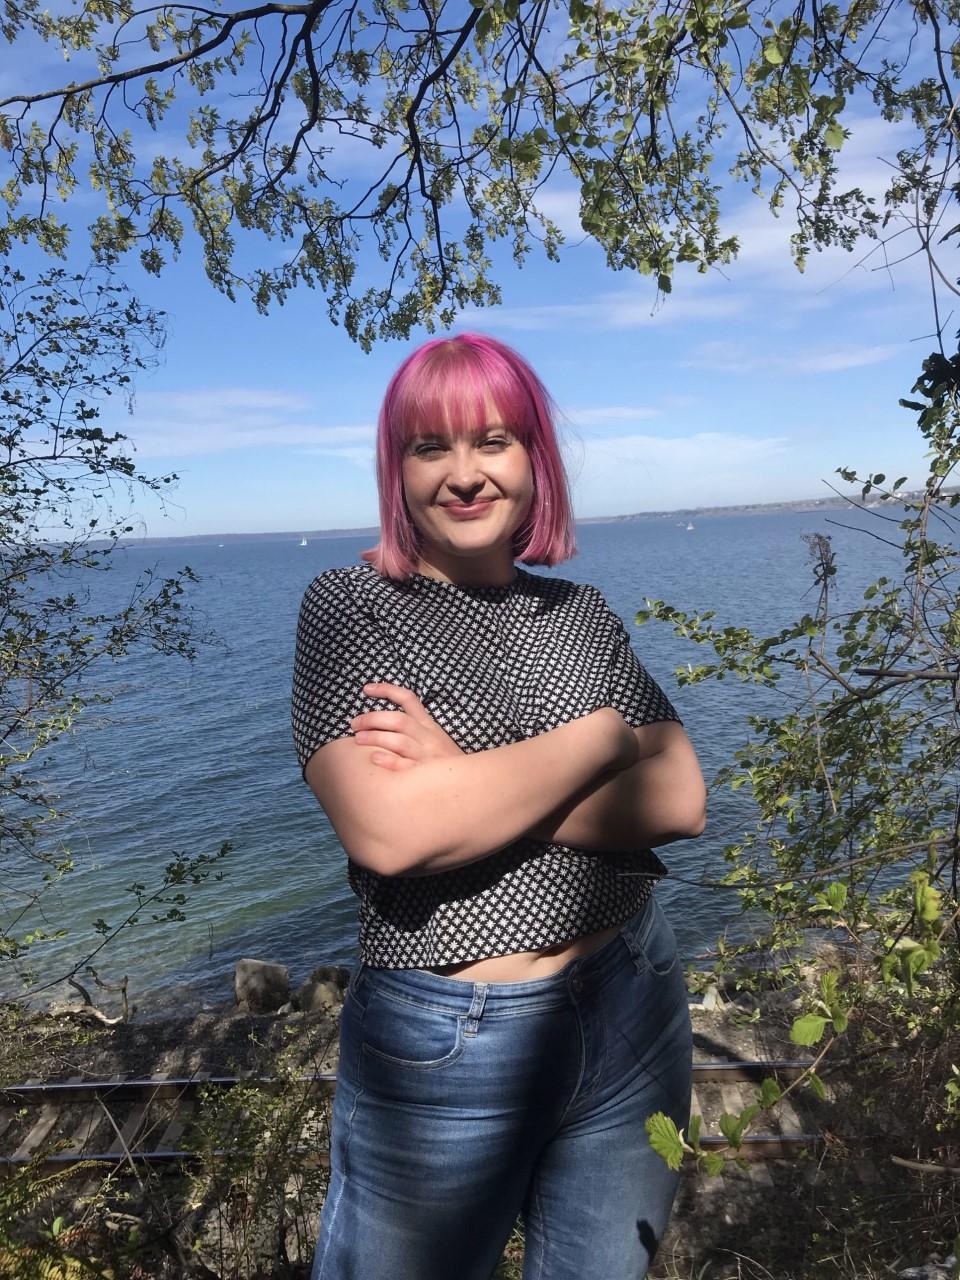 Shannon stands with arms crossed in front of Bellingham Bay